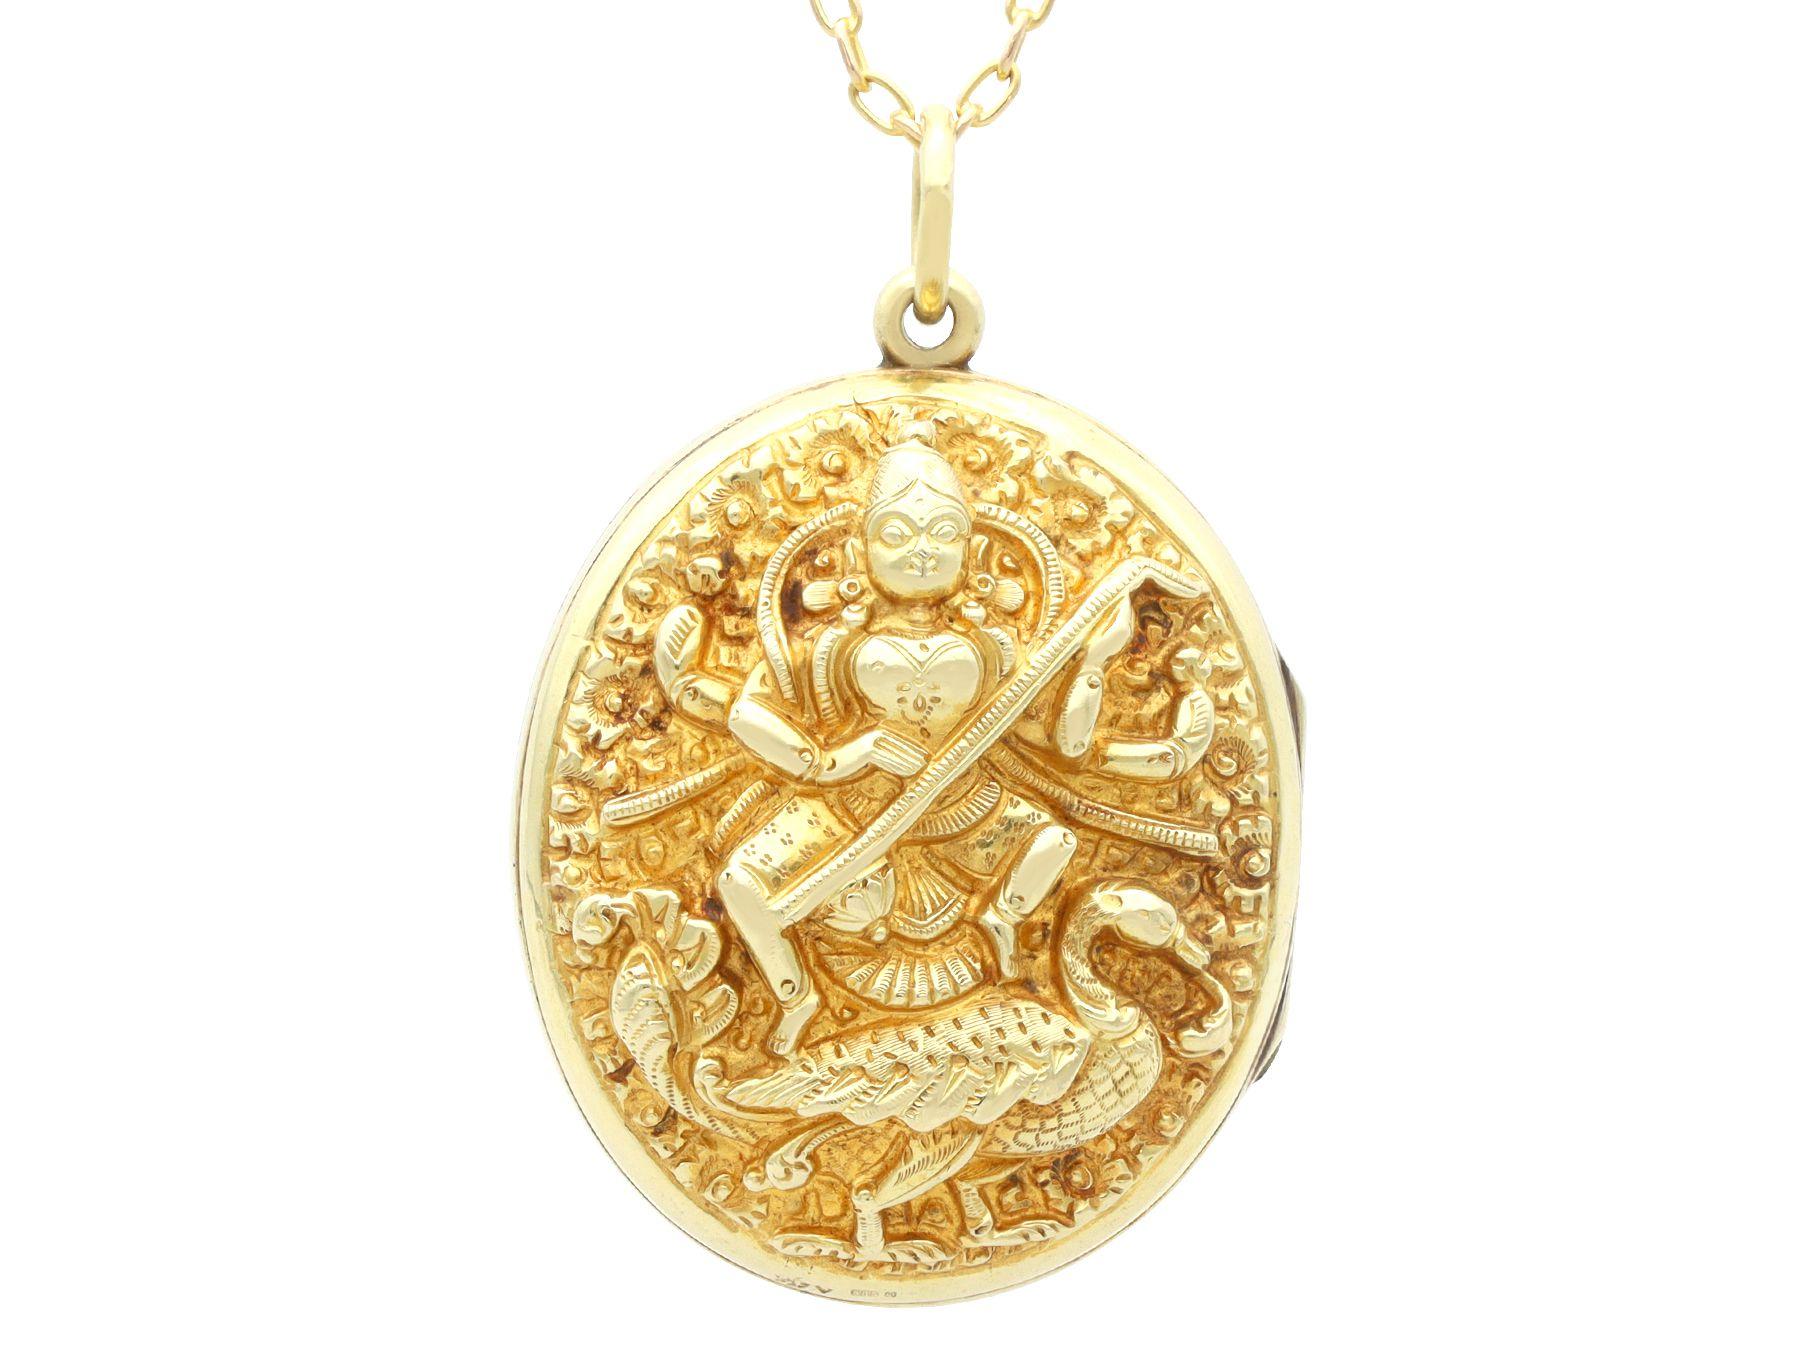 An exceptional, fine and impressive 14 karat yellow gold locket with a 17 karat yellow gold chain; part of our diverse antique jewellery and estate jewelry collections.

This exceptional, fine and impressive antique locket has been crafted in 14k